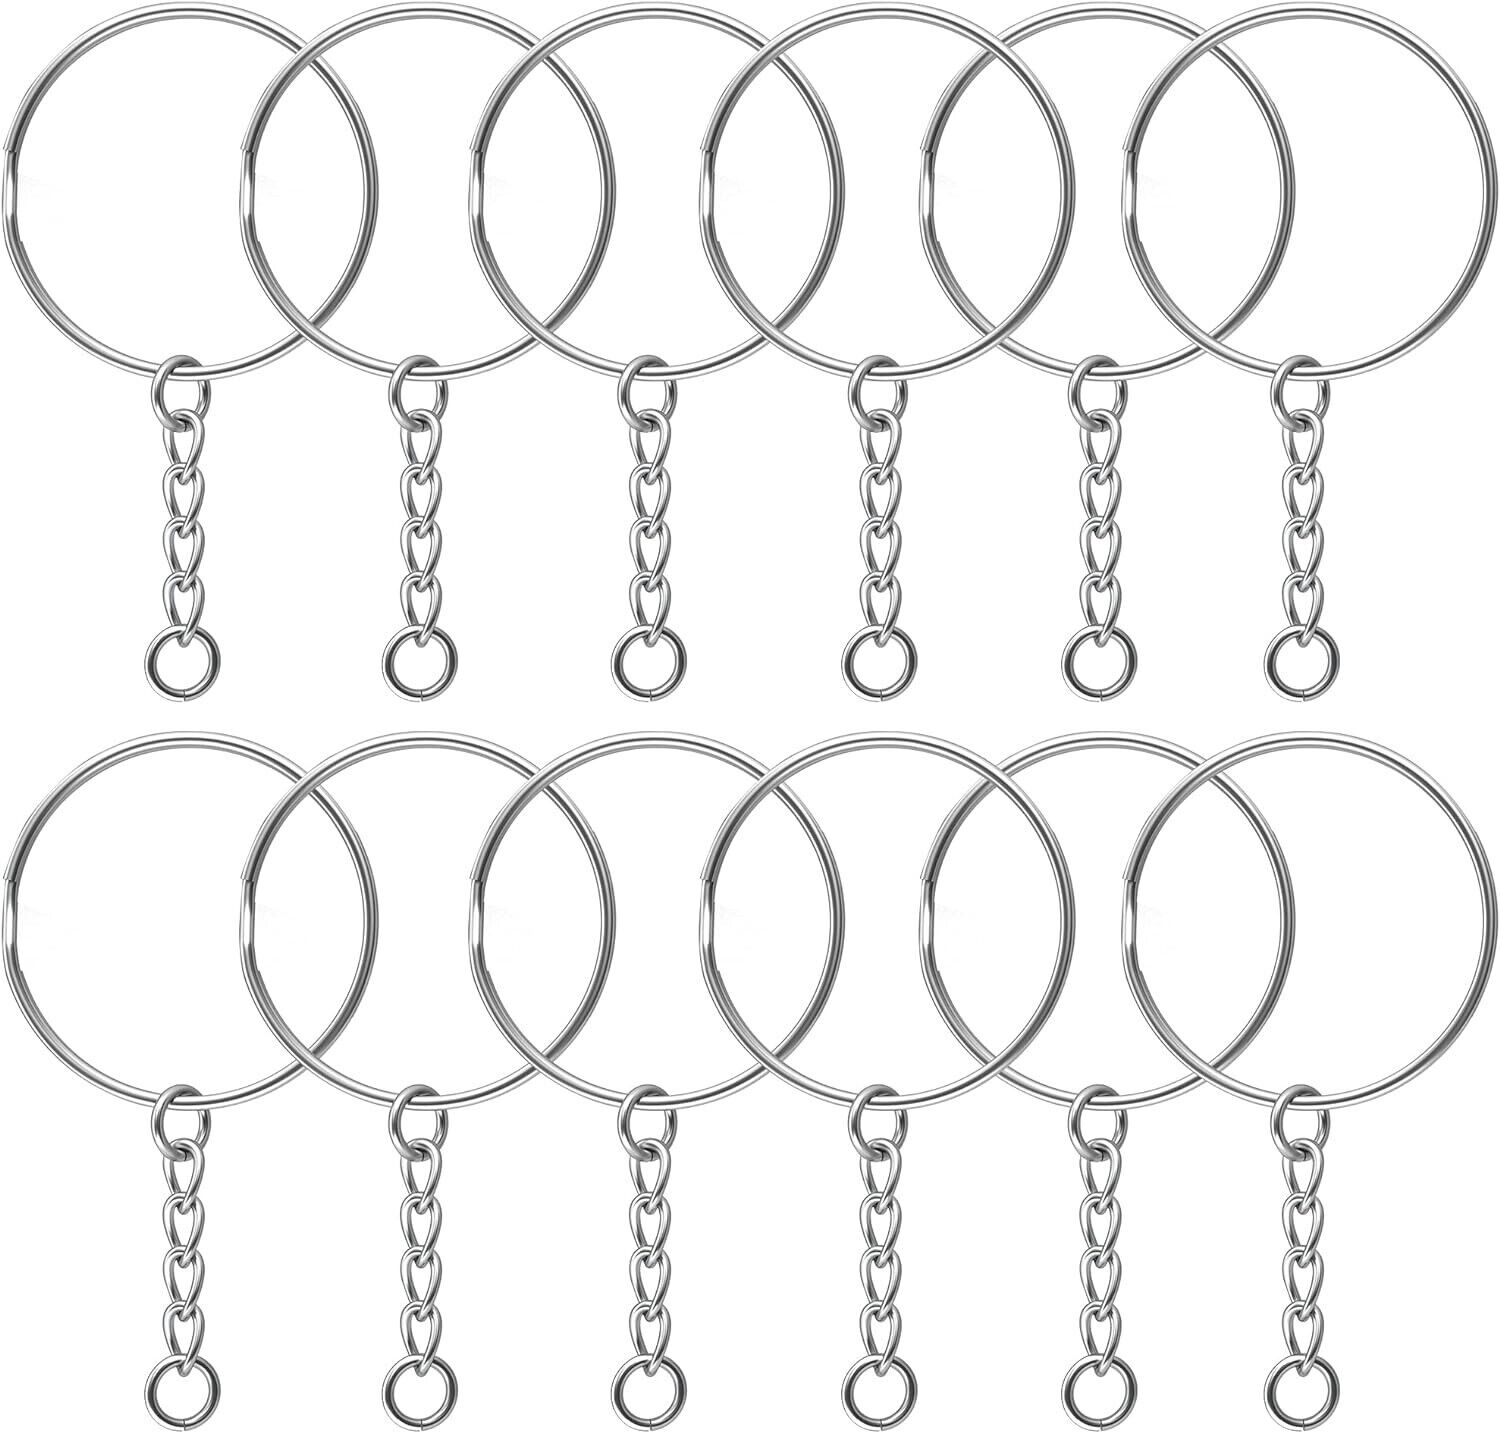 100Pcs Premium Silver Key Chain Rings Kit, Split Key Ring with Chain 1 Inch and 